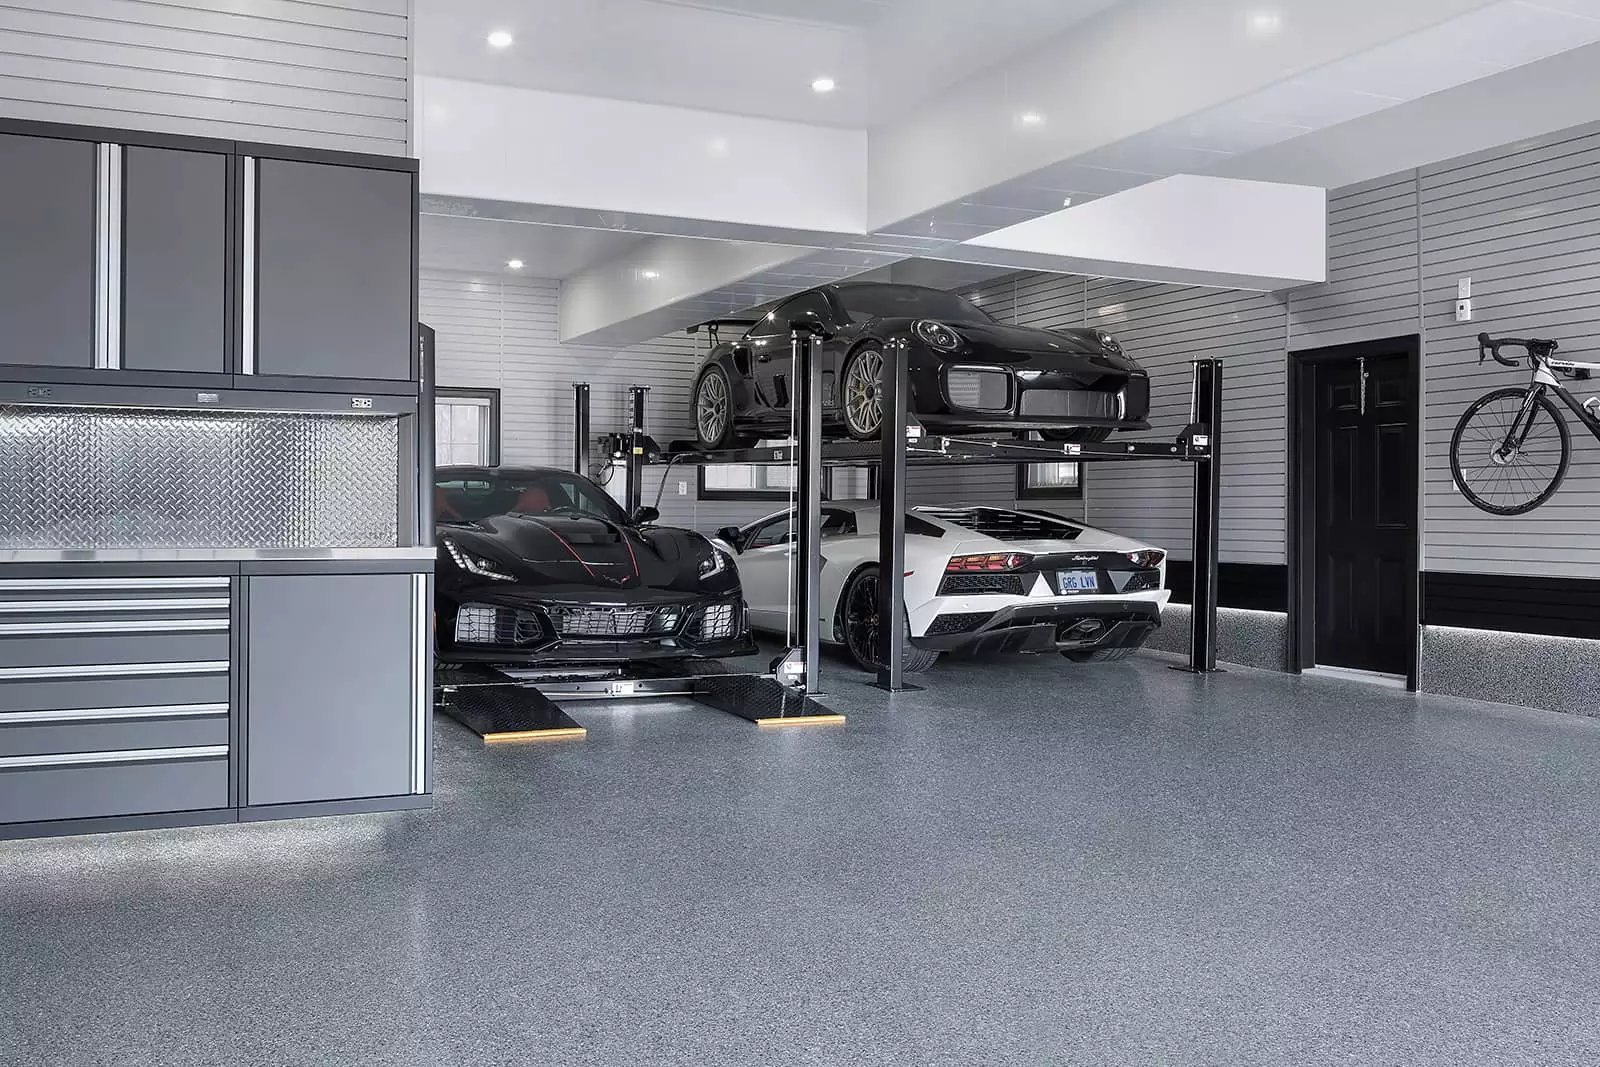 How Do I Know If a Car Lift Is Right for My Garage?